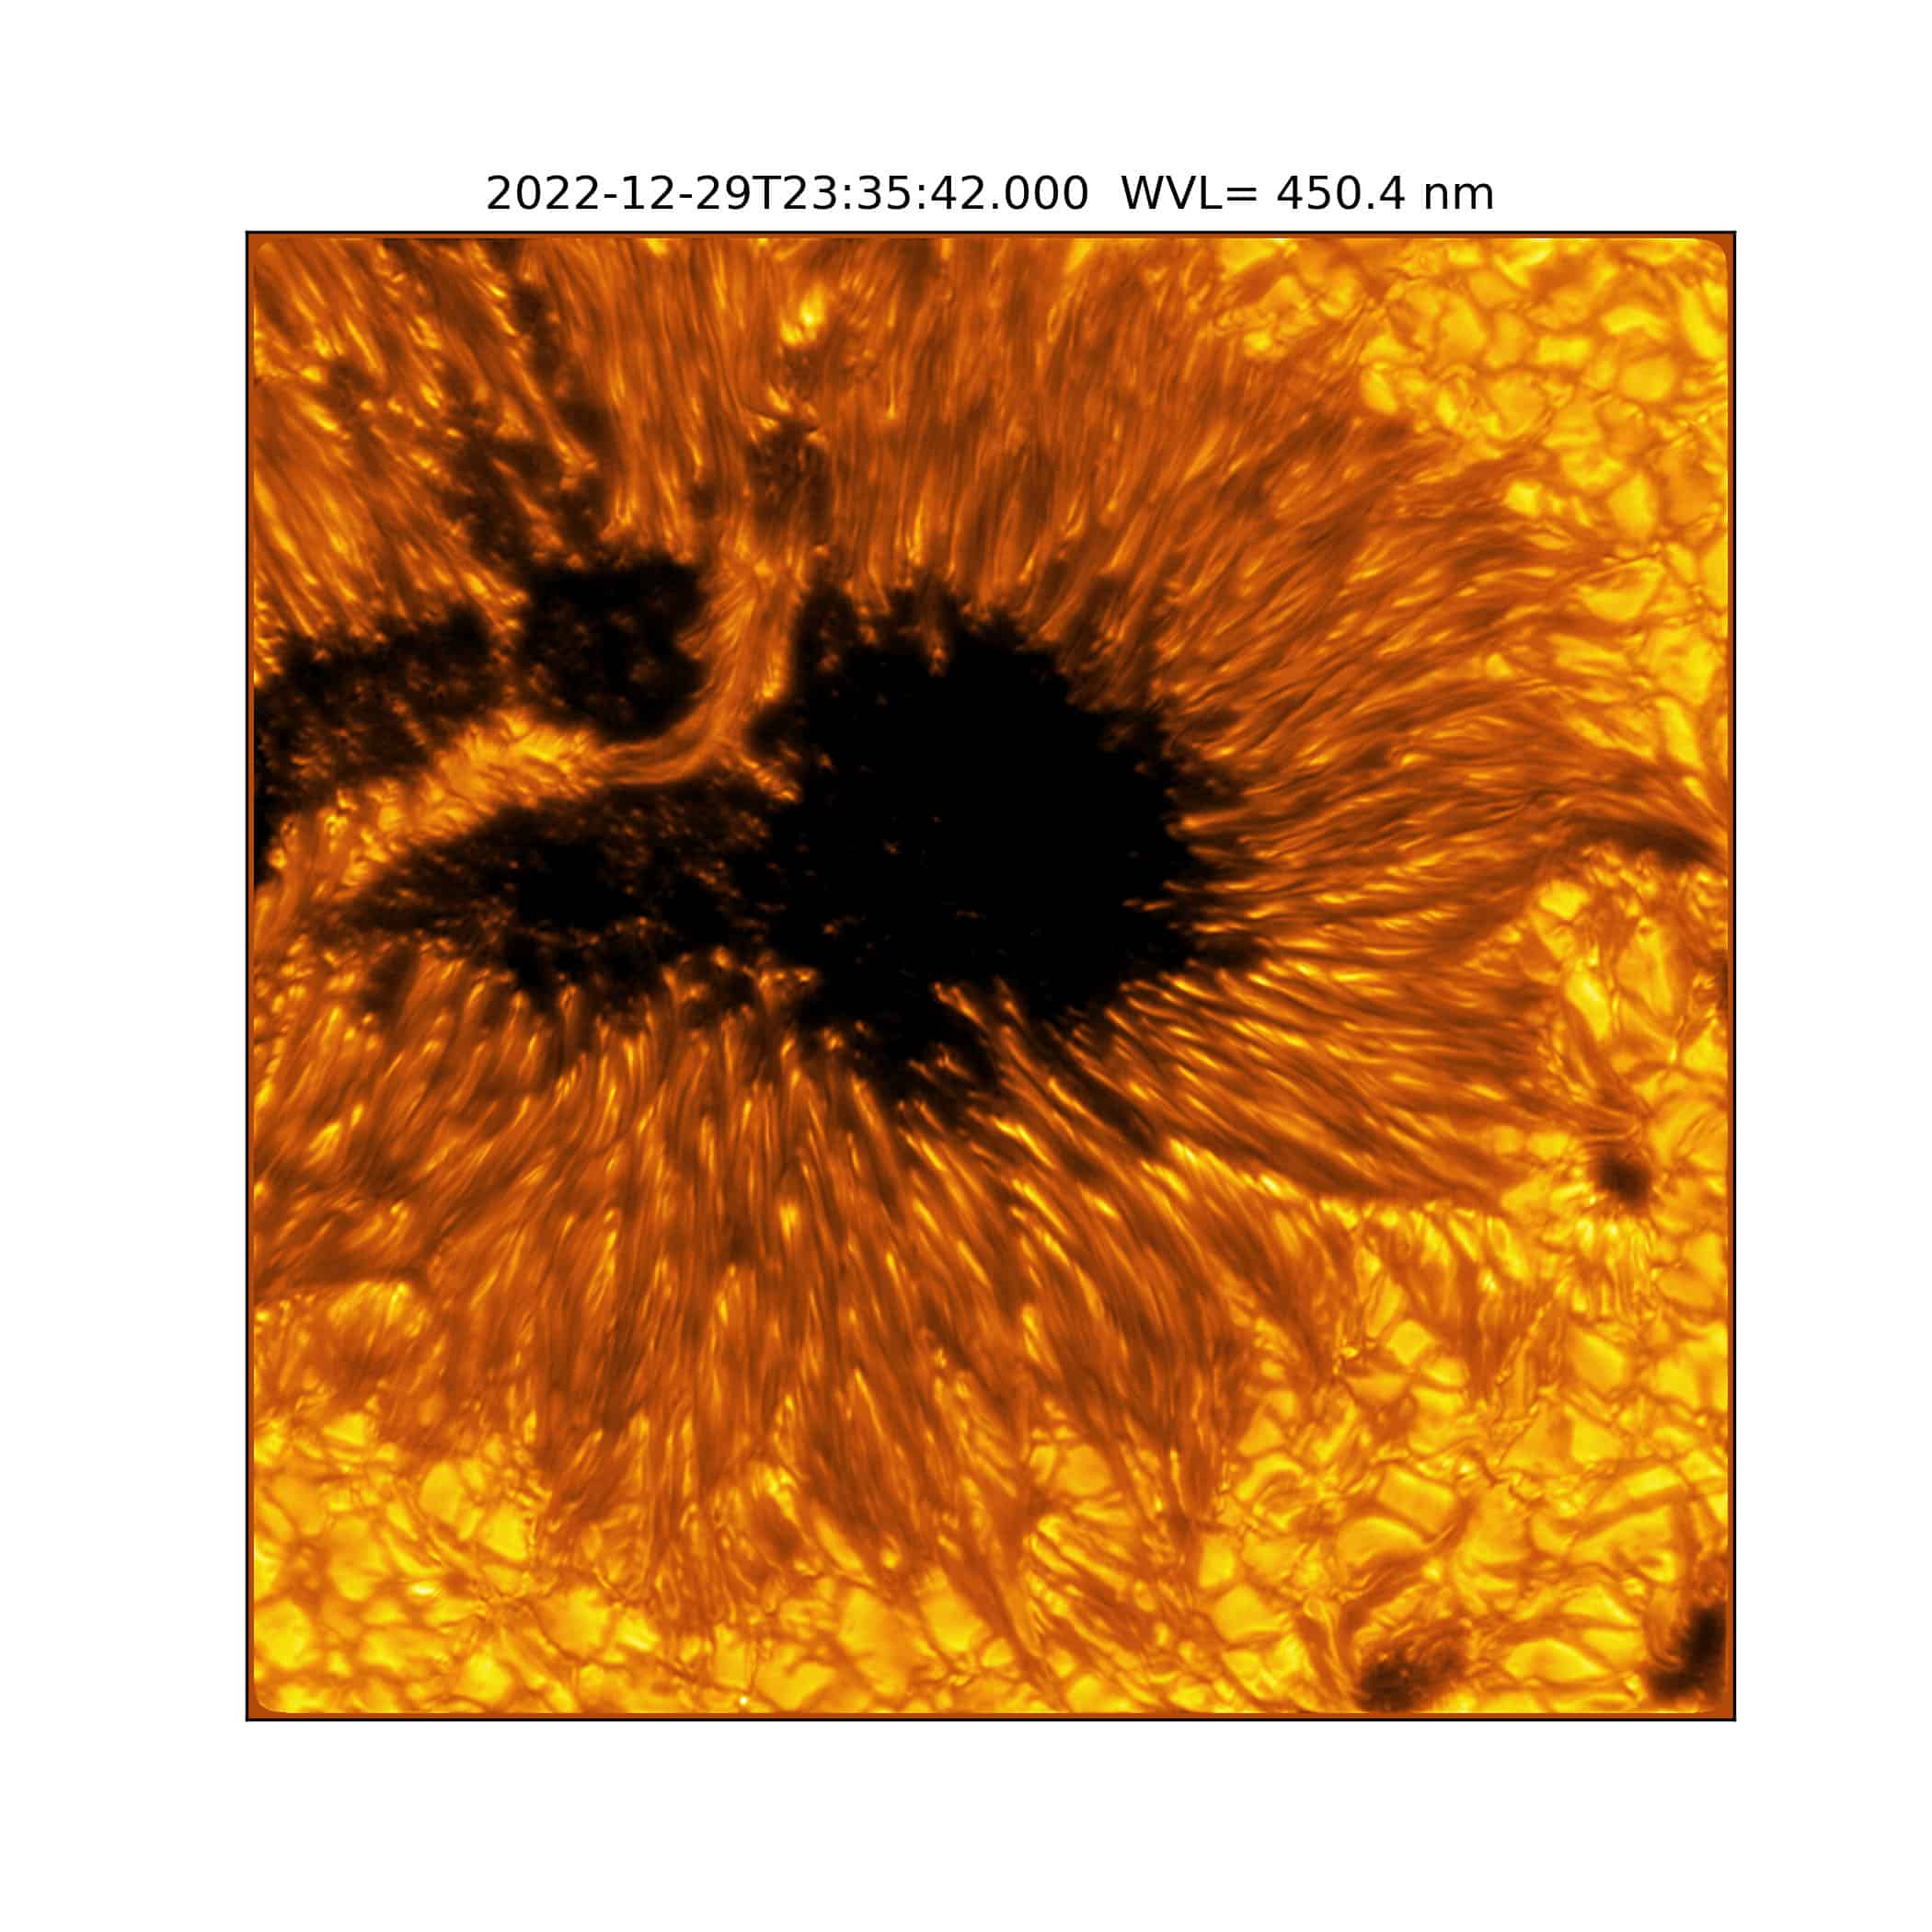 A detailed example of a light bridge crossing a sunspot’s umbra. In this picture, the presence of convection cells surrounding the sunspot is also evident. Hot solar material (plasma) rises in the bright centers of these surrounding “cells,” cools off, and then sinks below the surface in dark lanes in a process known as convection. The detailed image shows complex light bridge and convection cell structures on the Sun's surface or photosphere. Light bridge: A bright solar feature that spans across an umbra from one penumbra to the other. It is a complex structure, taking different forms and phases, and is believed to be the signature of the start of a decaying sunspot. Umbra: Dark, central region of a sunspot where the magnetic field is strongest. Image Title: Properties of Convection Cells and Light Bridge Seen Around a Sunspot PID: PID_1_29 Large Field of View: 30,720km x 30,720km Image Credit: NSF/AURA/NSO Image Processing: Friedrich Wöger(NSO), Catherine Fischer (NSO) Science Credit: Philip Lindner at Leibniz-Institut für Sonnenphysik (KIS)